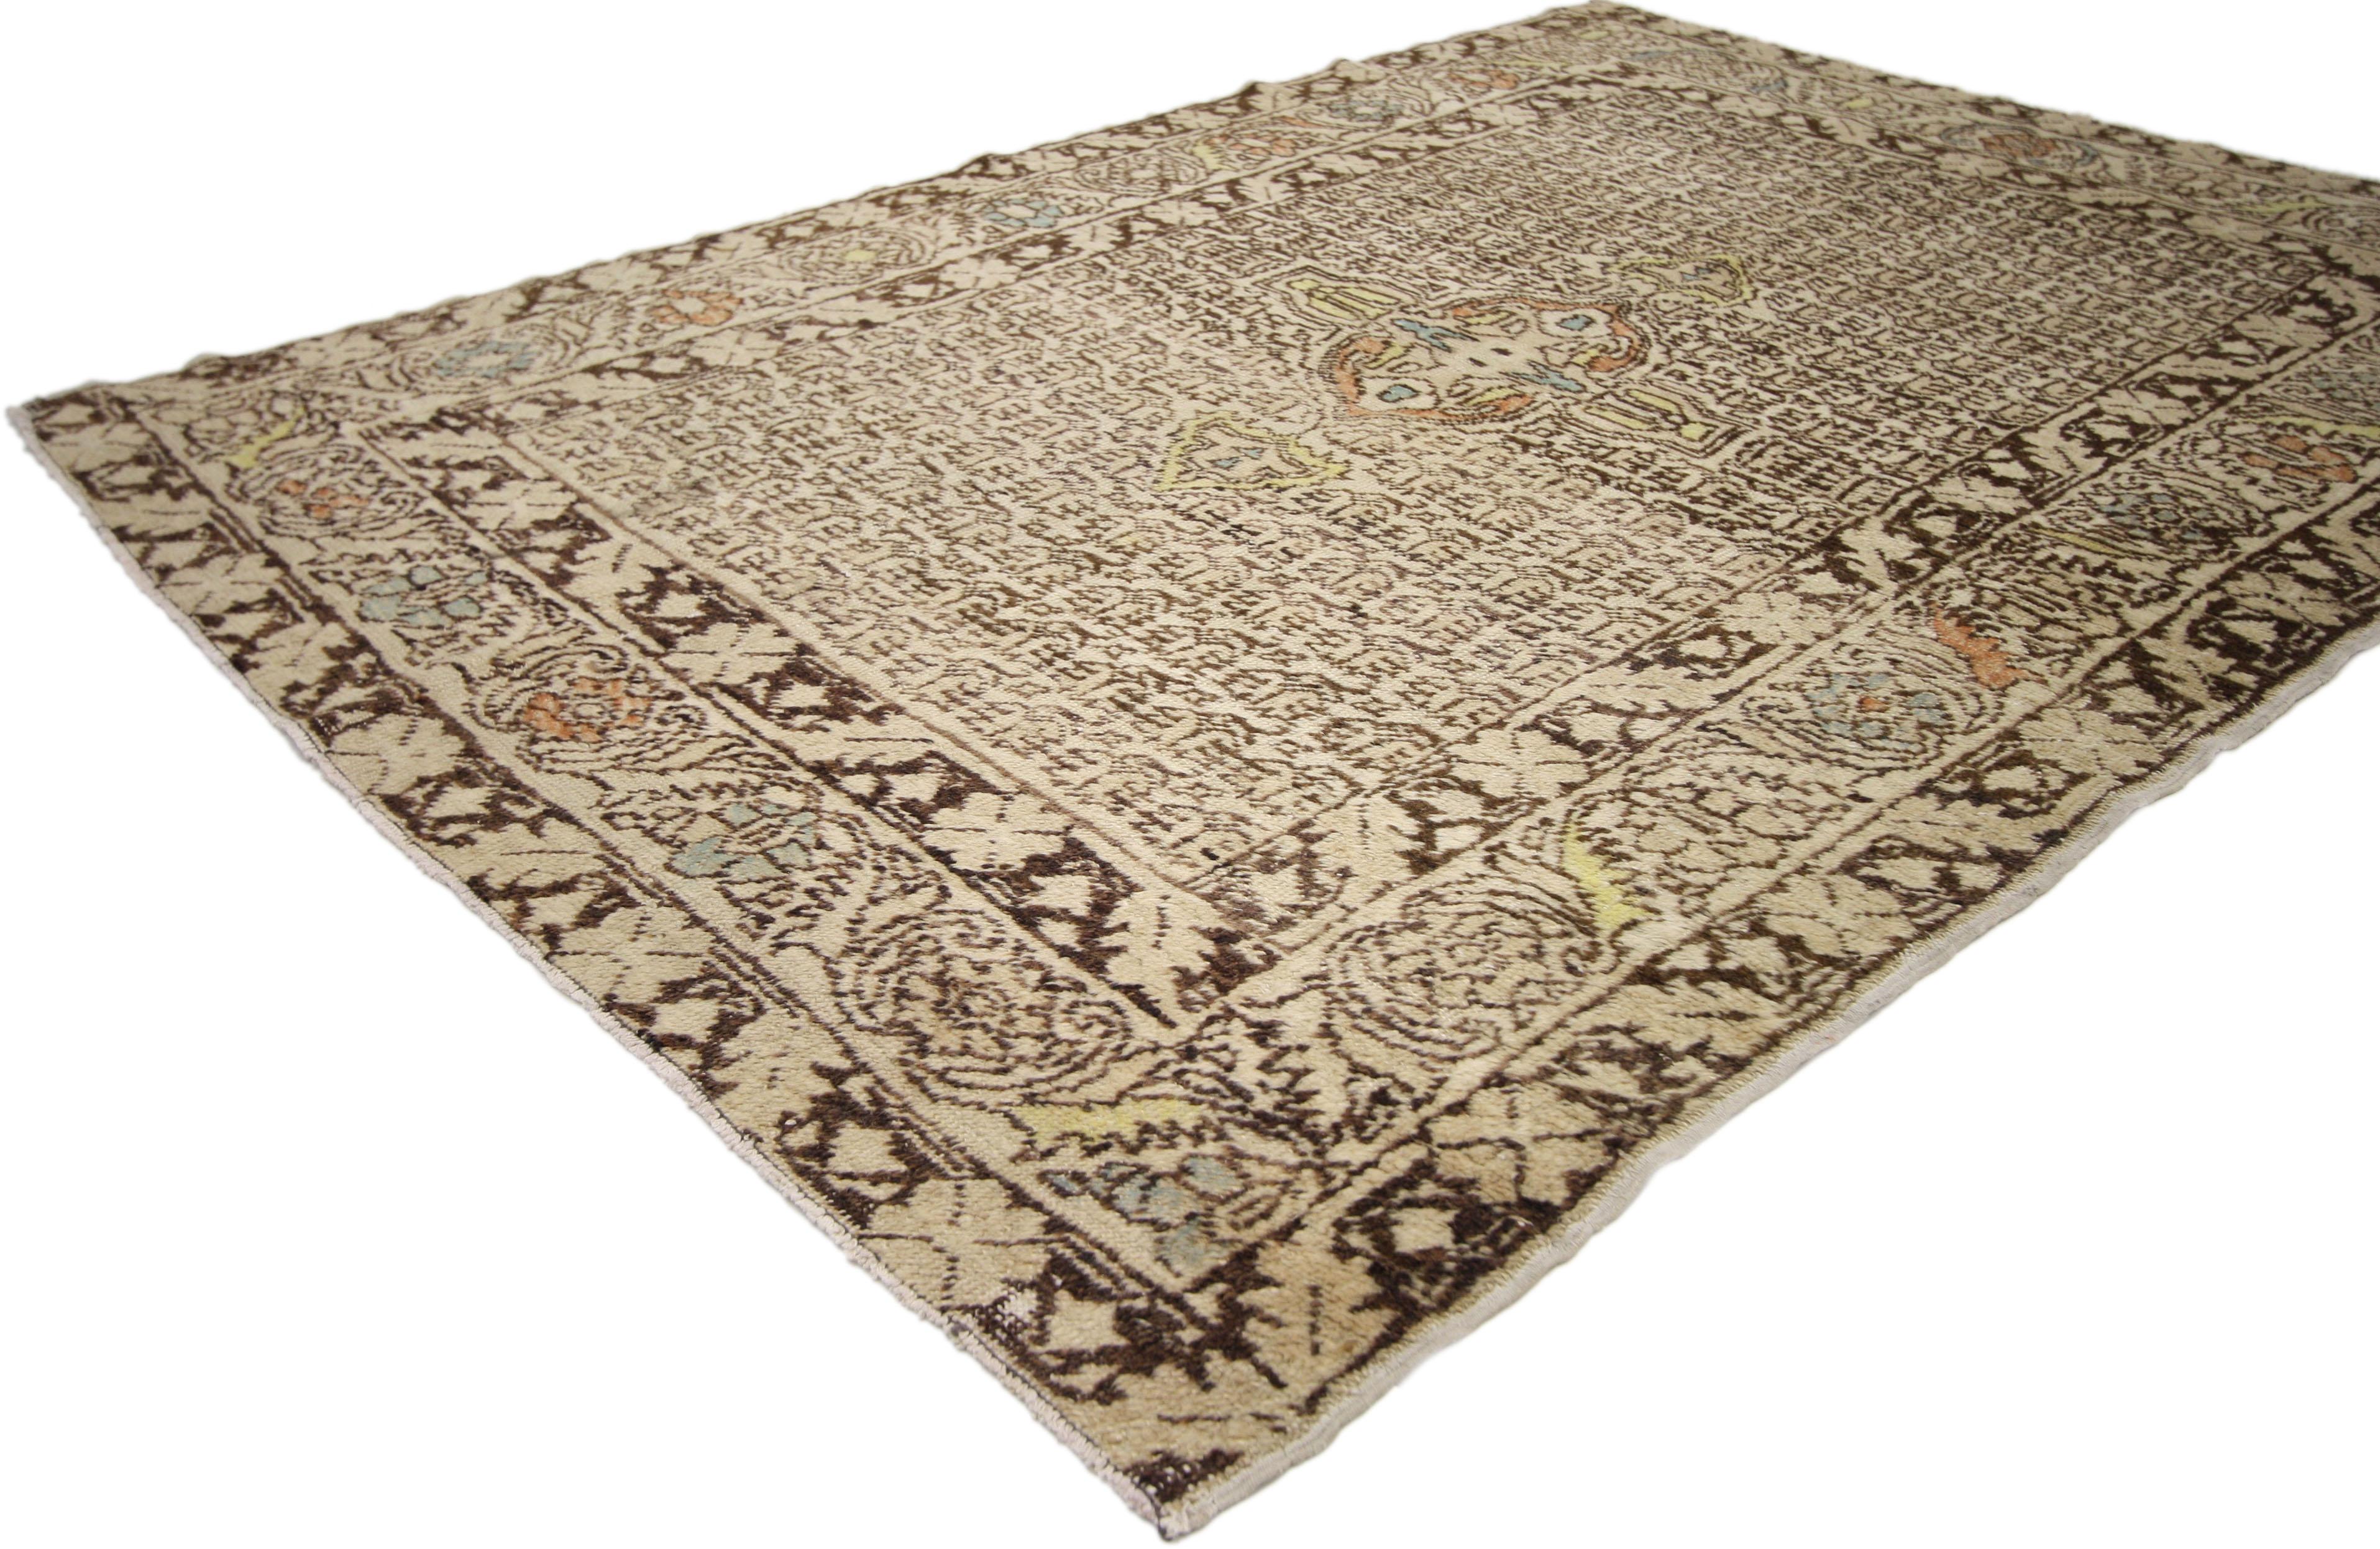 52335, vintage Turkish Oushak rug with Transitional William and Mary style. With its neutral color palette, straight and curved lines, this hand knotted wool vintage Turkish Oushak rug beautifully embodies William and Mary style with a modern twist.